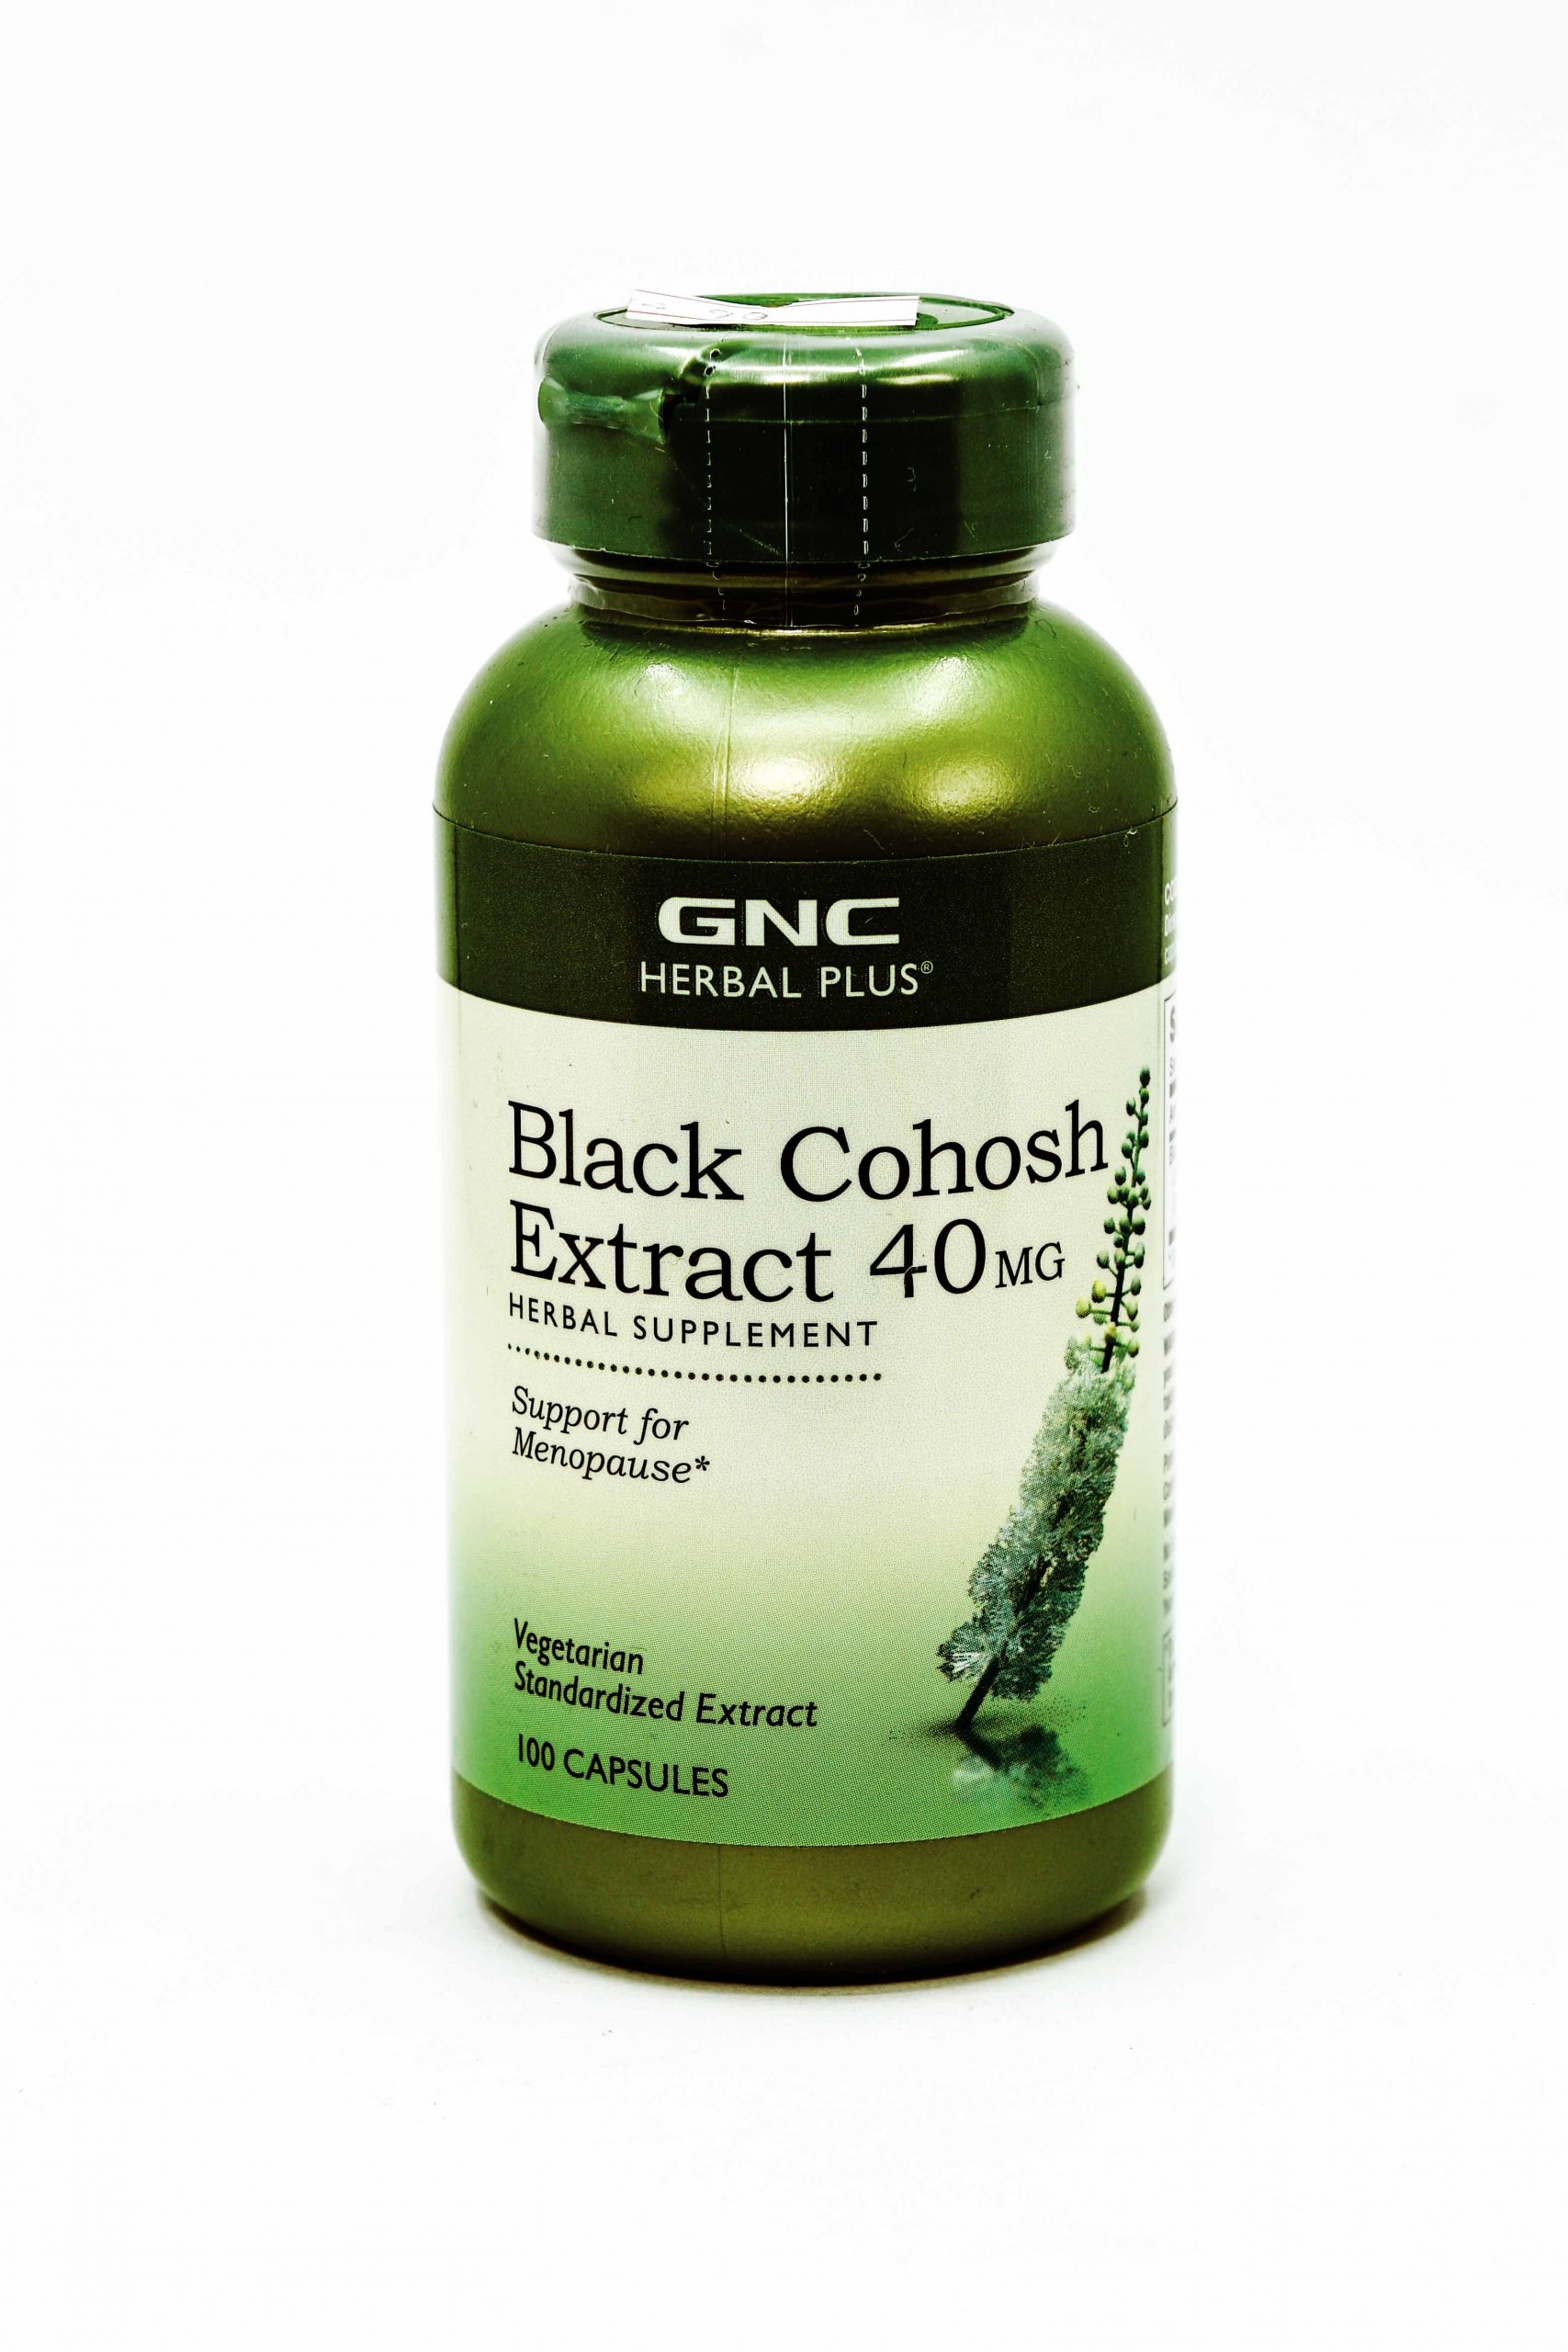 Black Cohost Extract